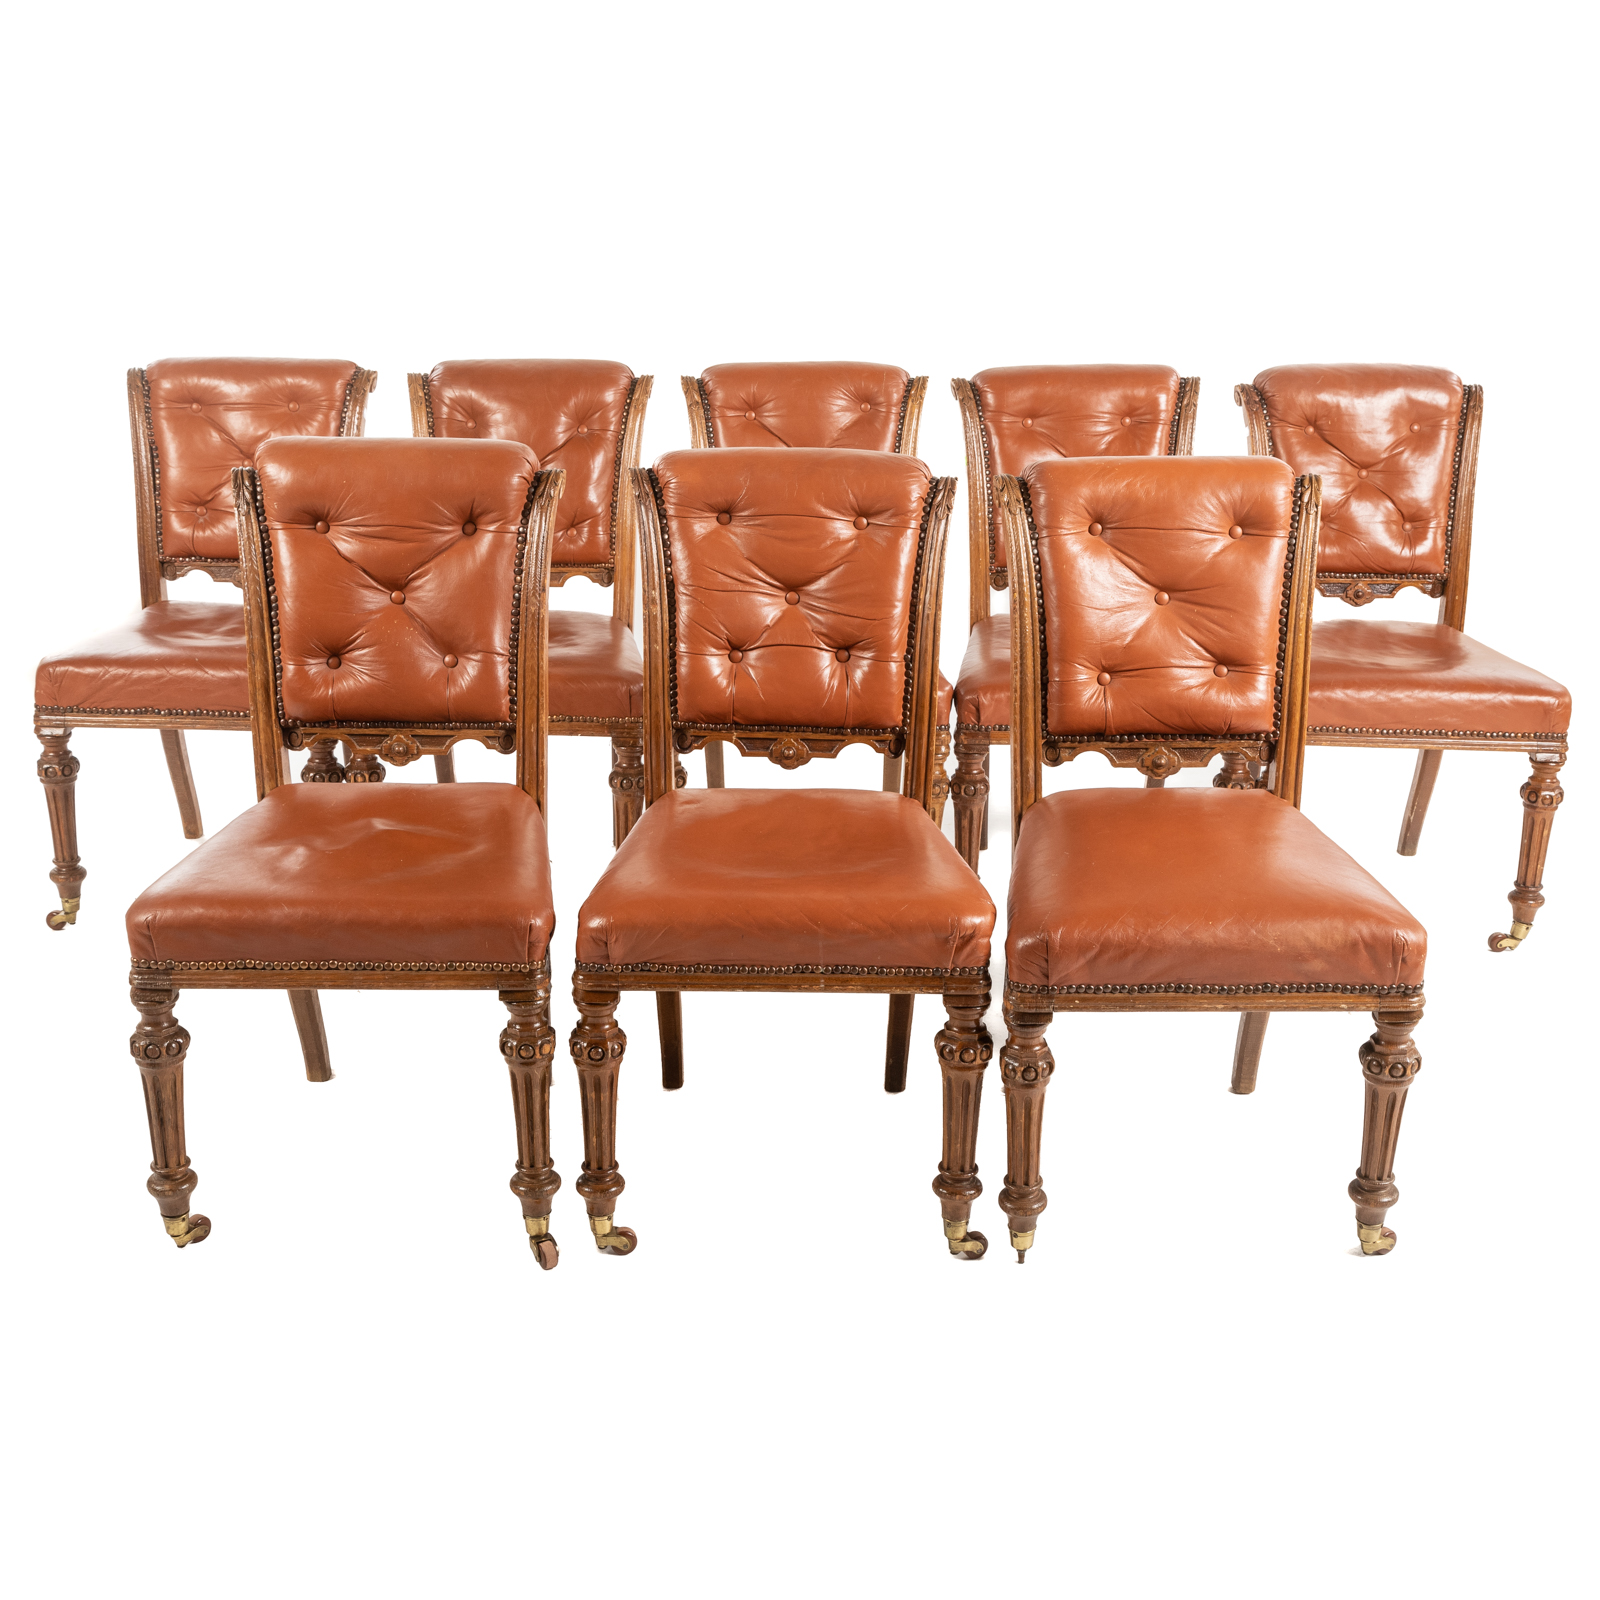 SET OF EIGHT VICTORIAN CARVED WALNUT